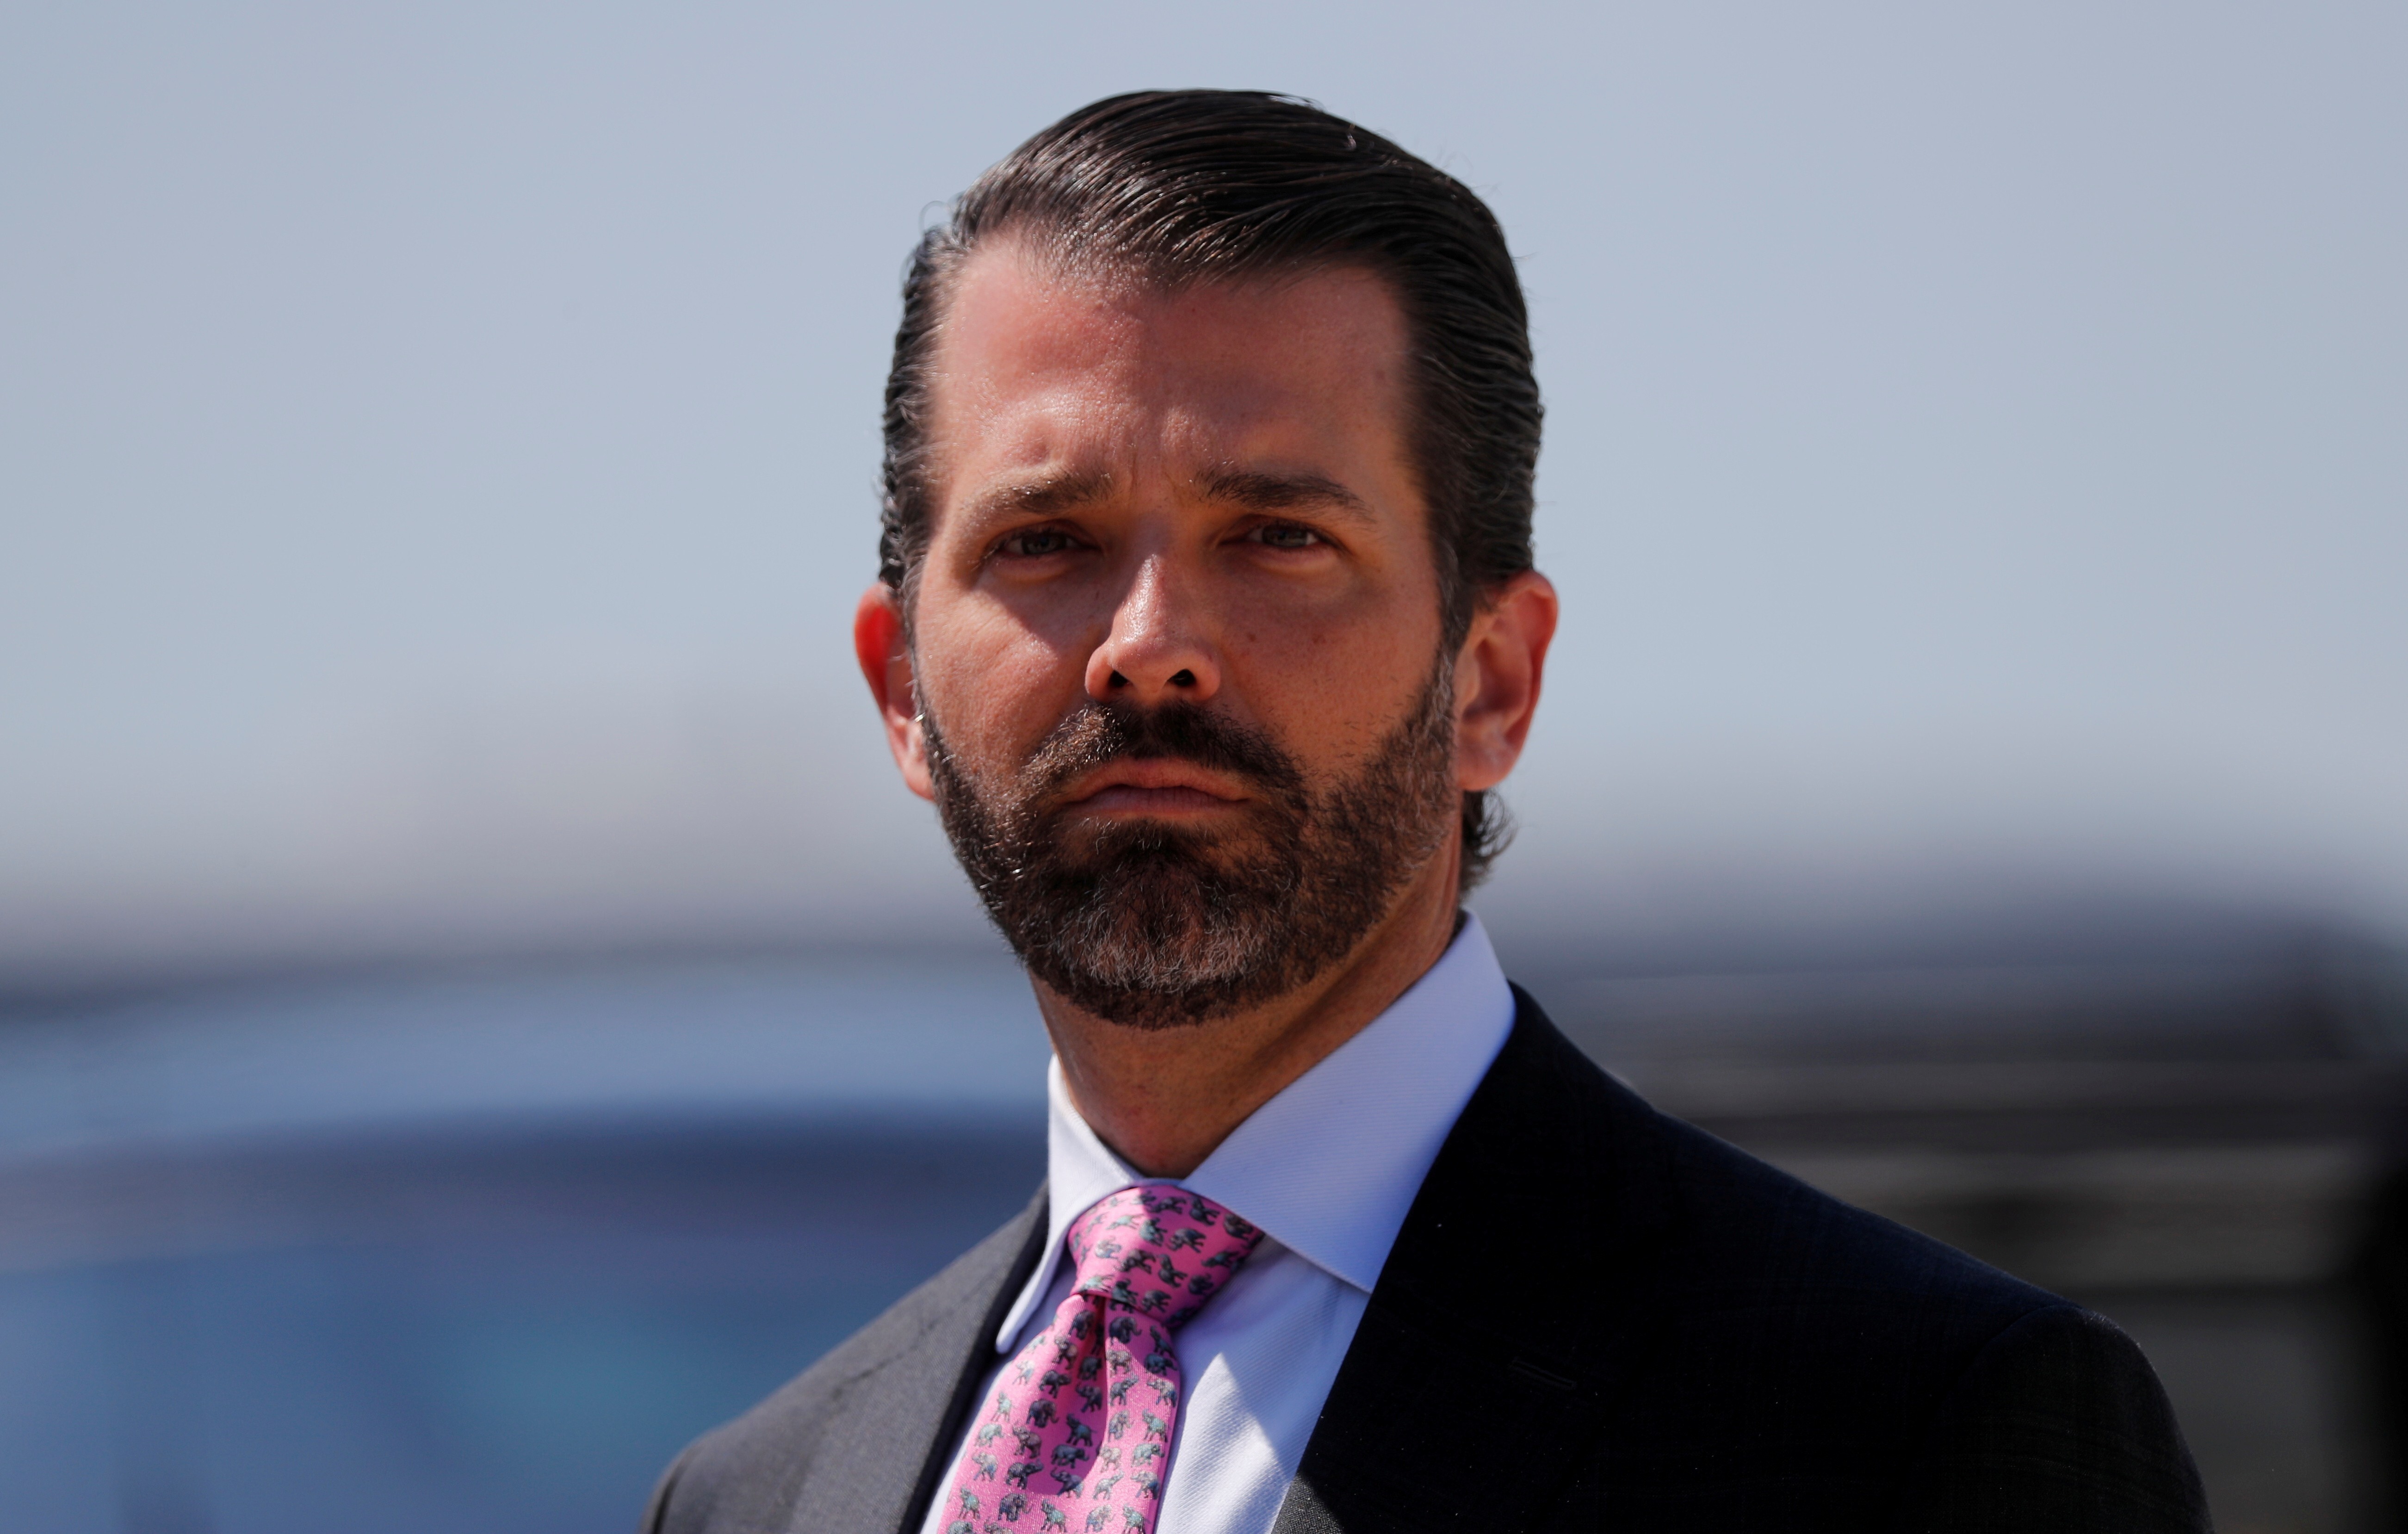 Donald Trump Jnr arrives in Milwaukee, Wisconsin, in July 2019. Photo: Reuters